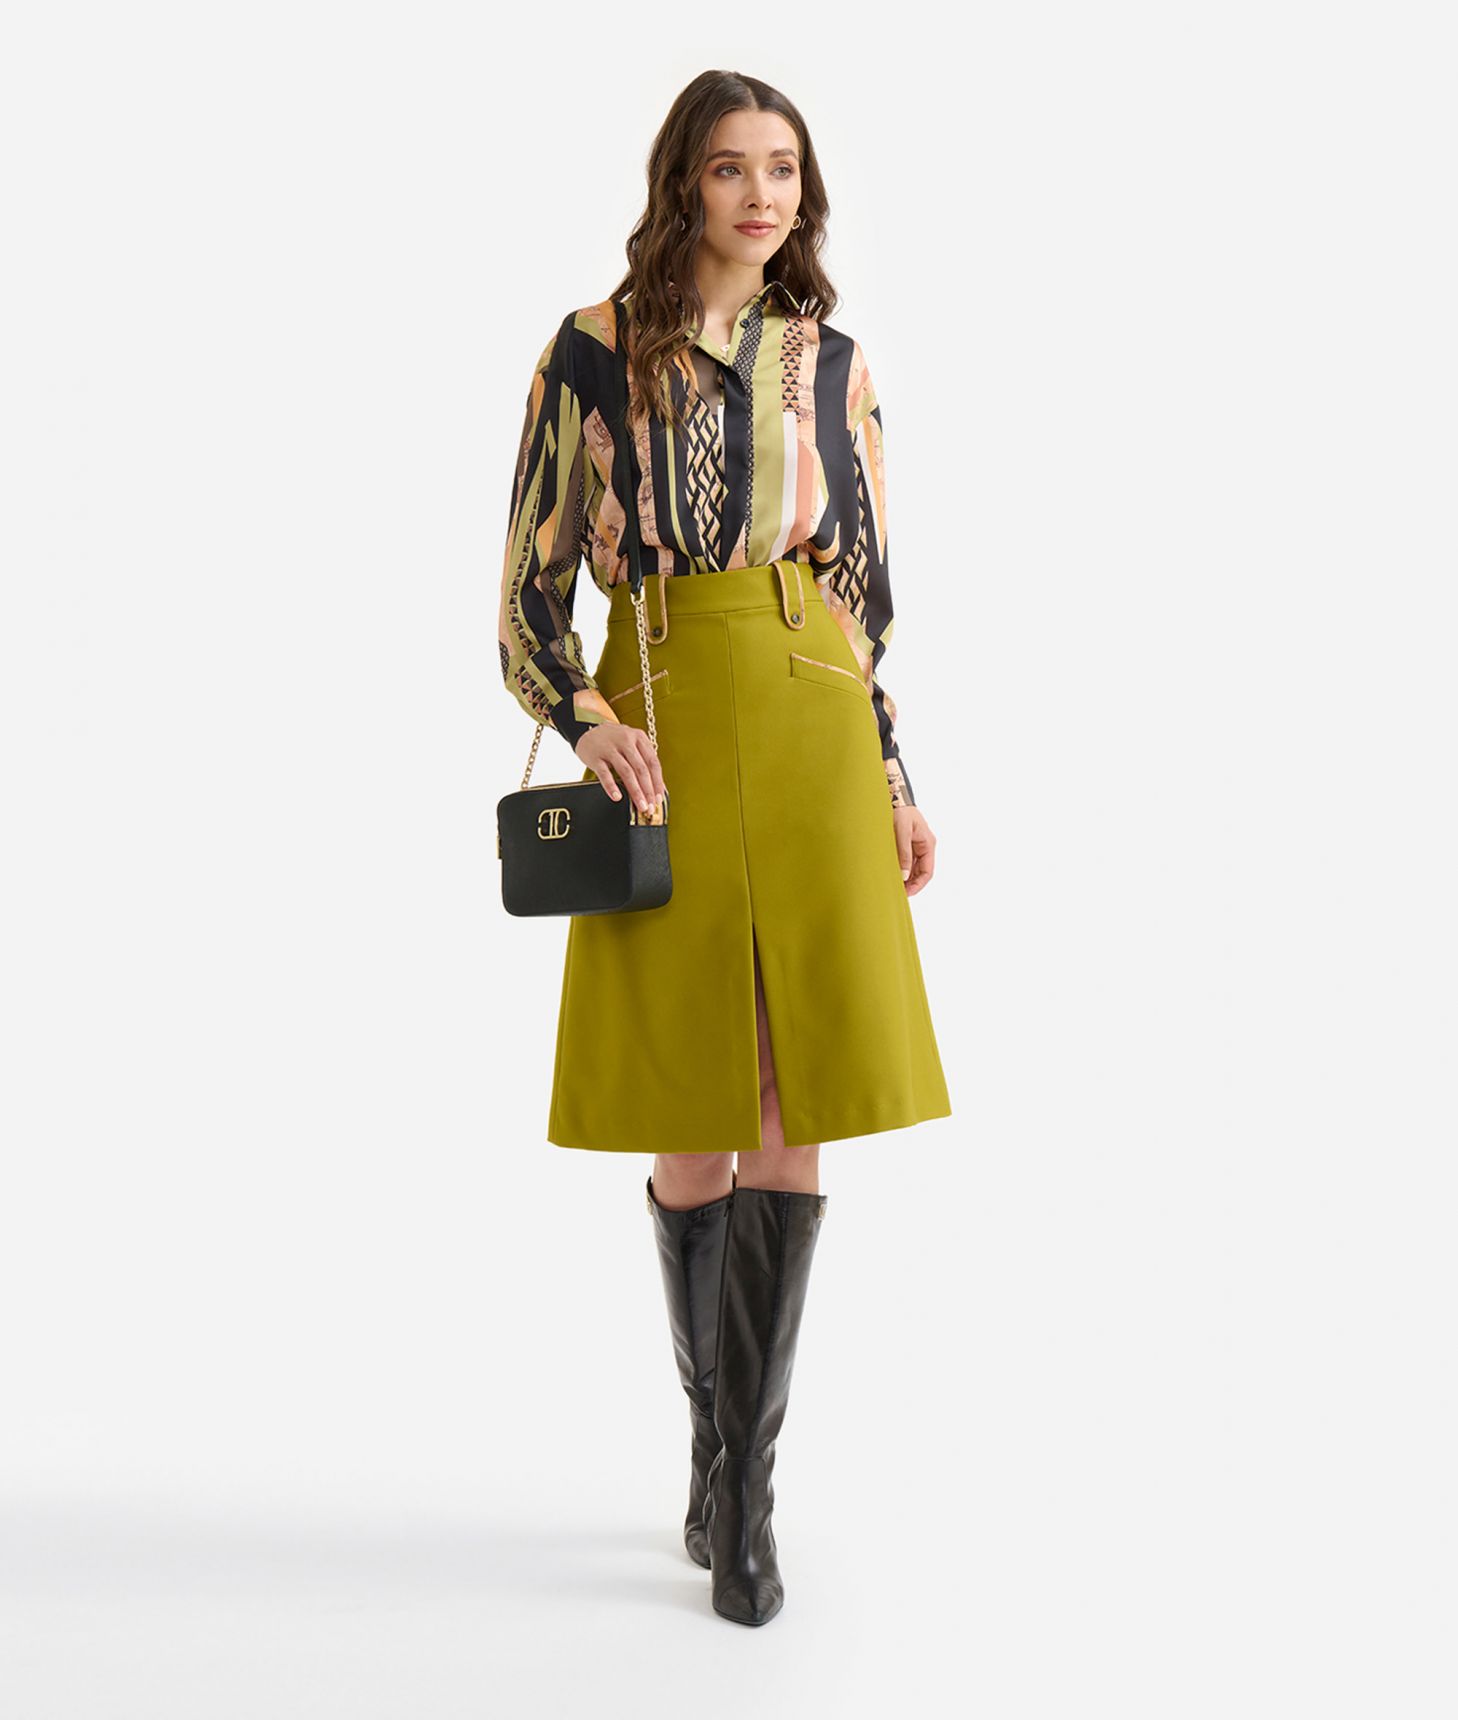 Cavalry twill skirt with maxi loops Topaz Green,front